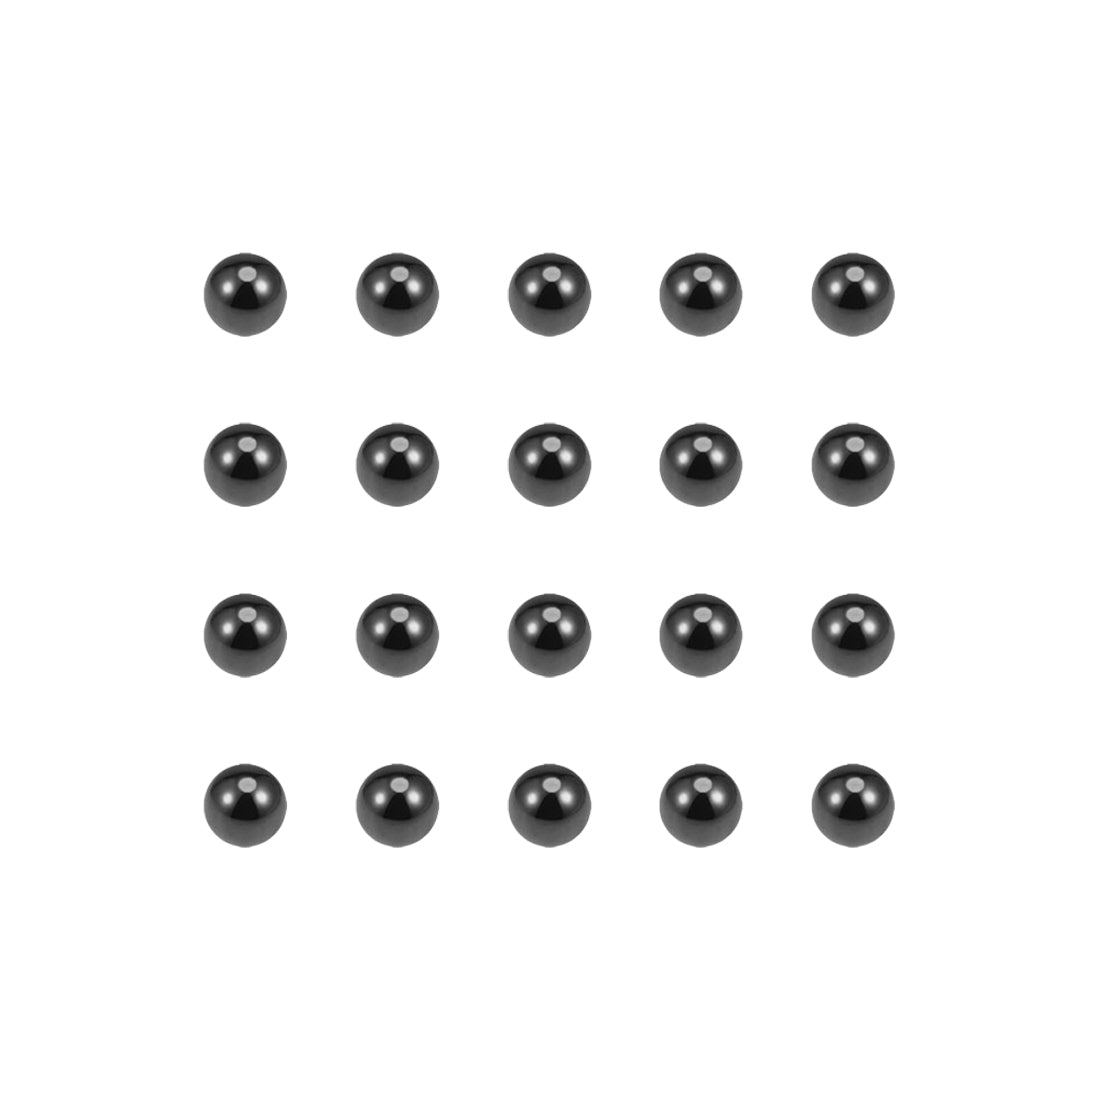 Uxcell Uxcell 3/32" Ceramic Bearing Balls, Si3N4 Silicon Nitride Ball G5 Precision 12pcs